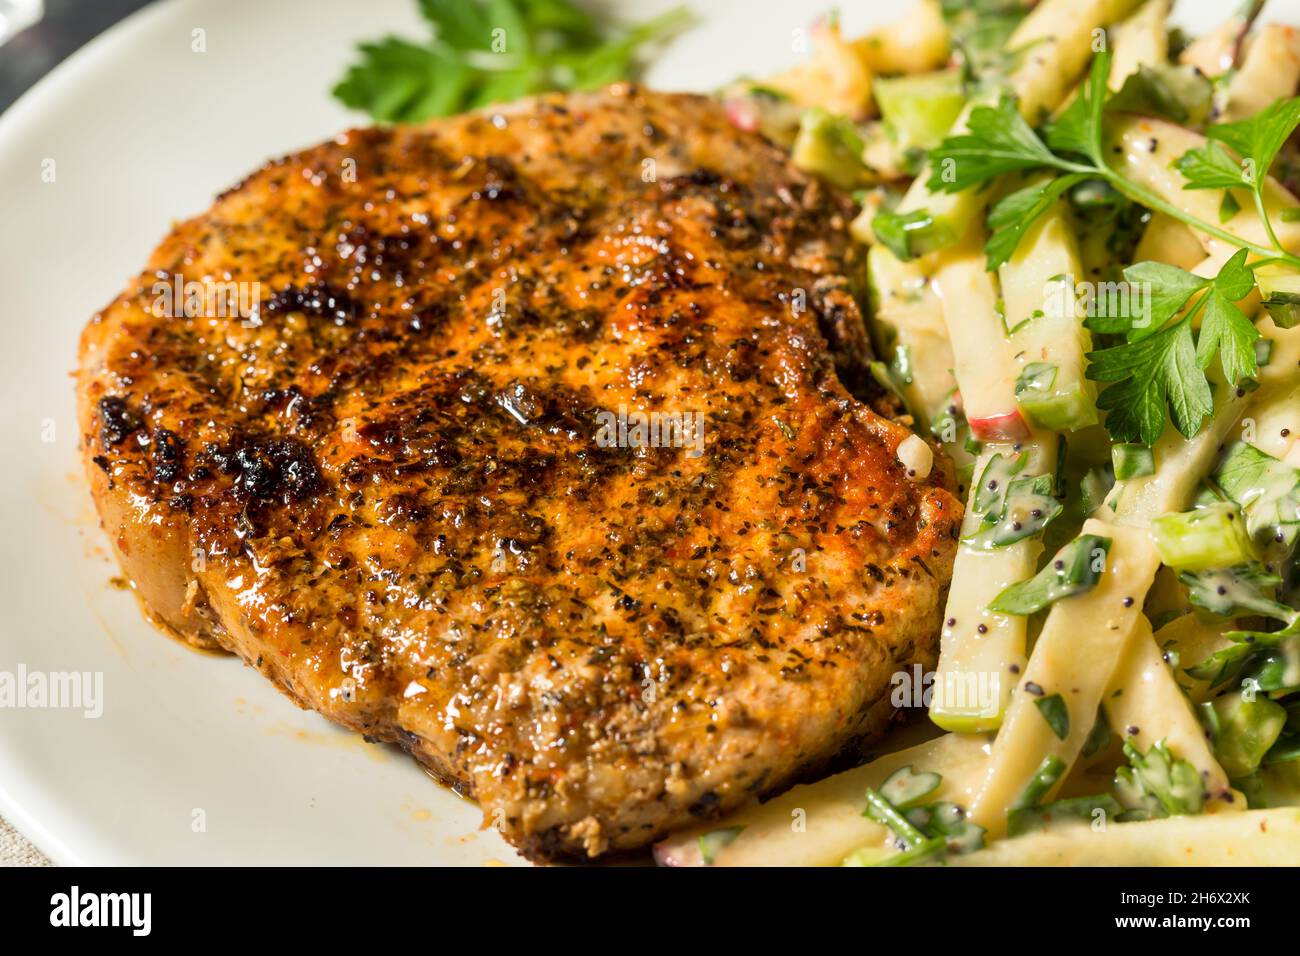 Homemade Roasted Pork Chop with Apple Slaw and Parsley Stock Photo